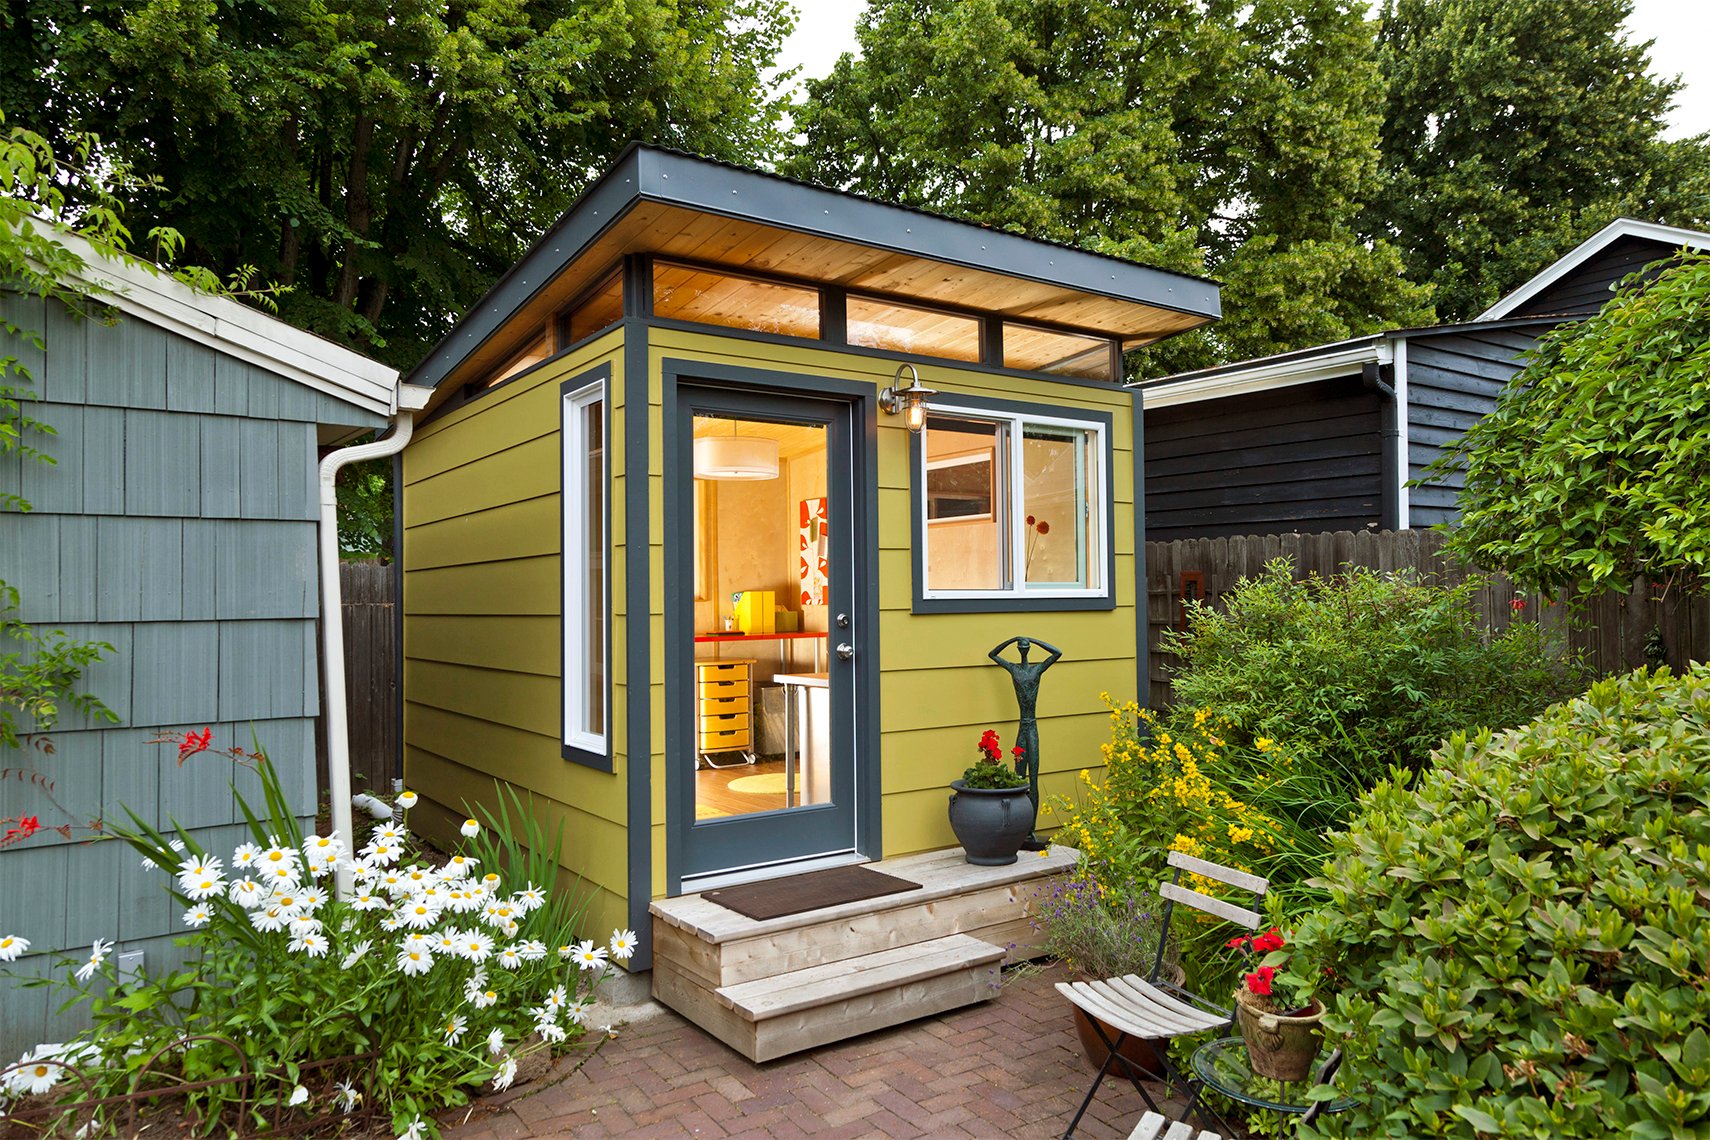 move over man cave, welcome the she shed - high quality